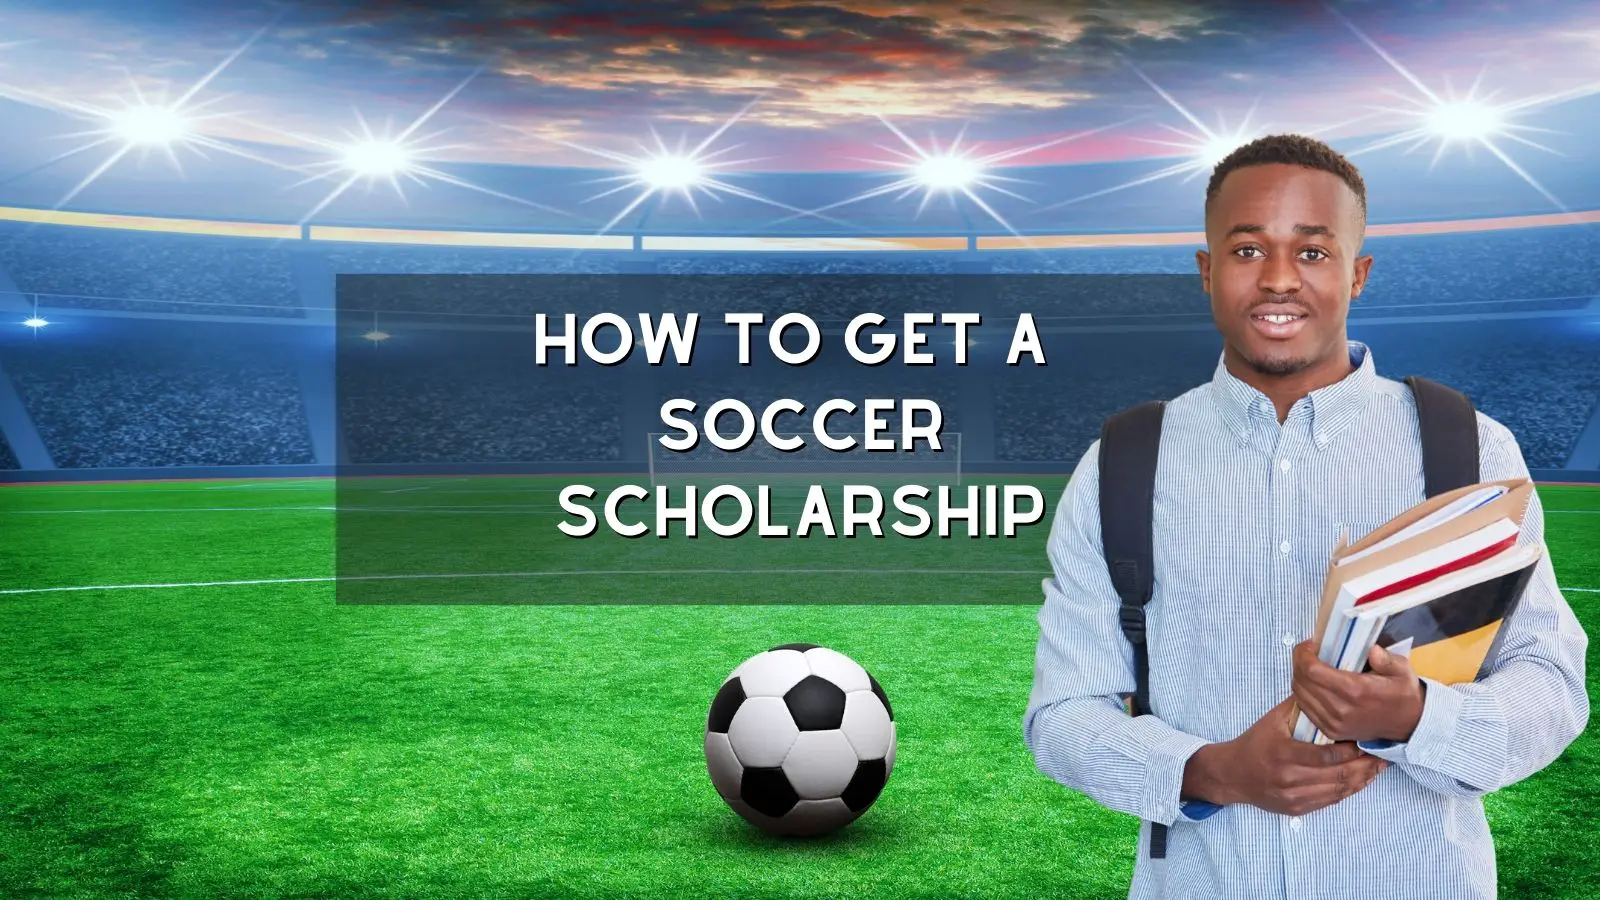 How to get a soccer scholarship